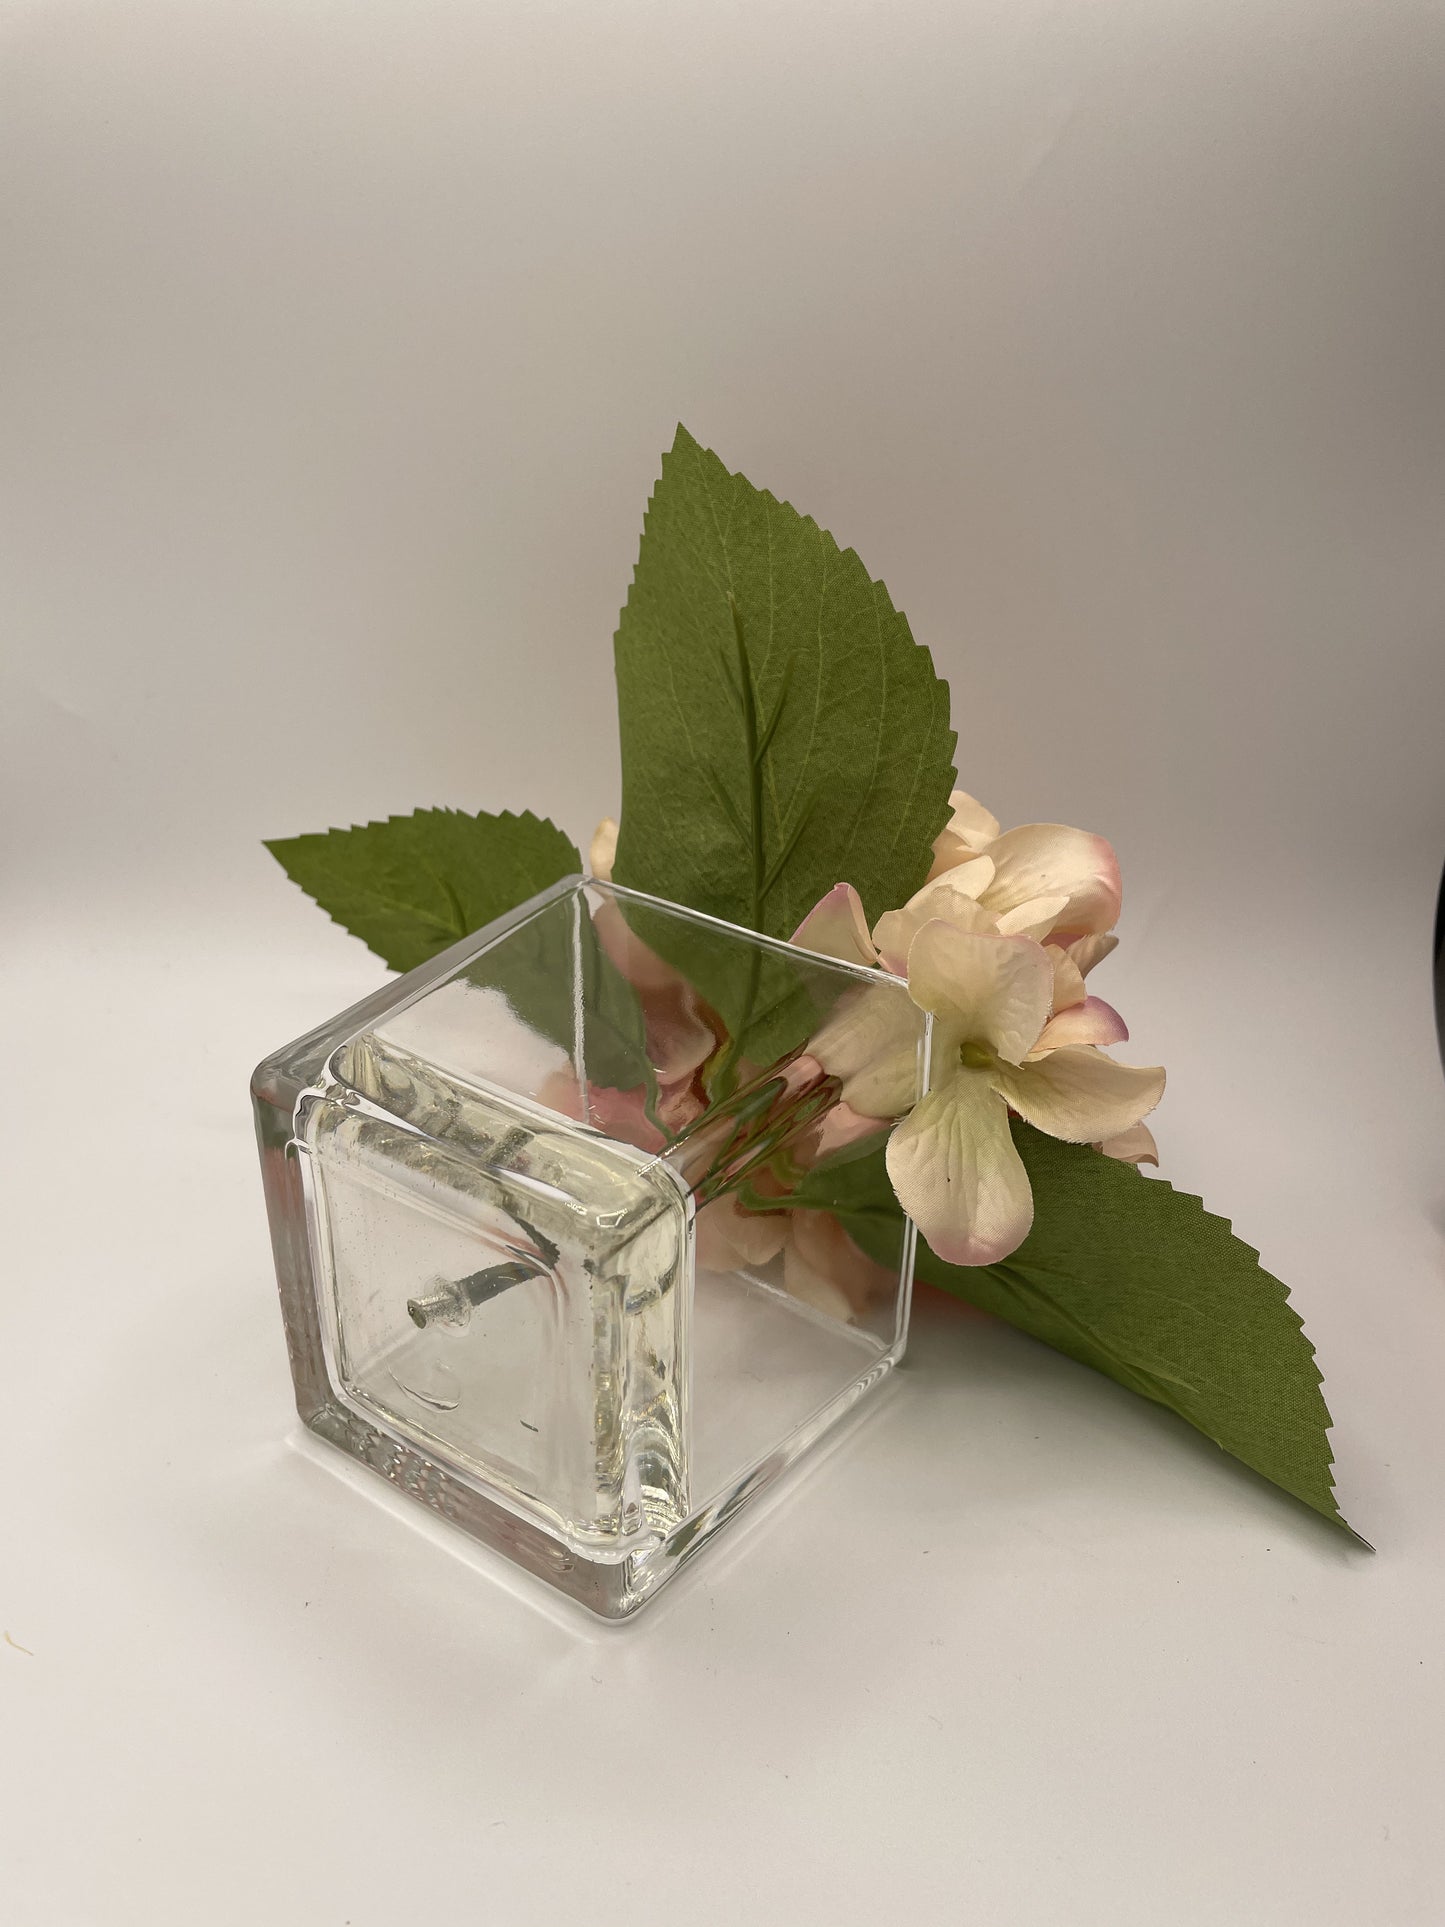 5" Artificial Pink Hydrangea fixed in a Glass Cube